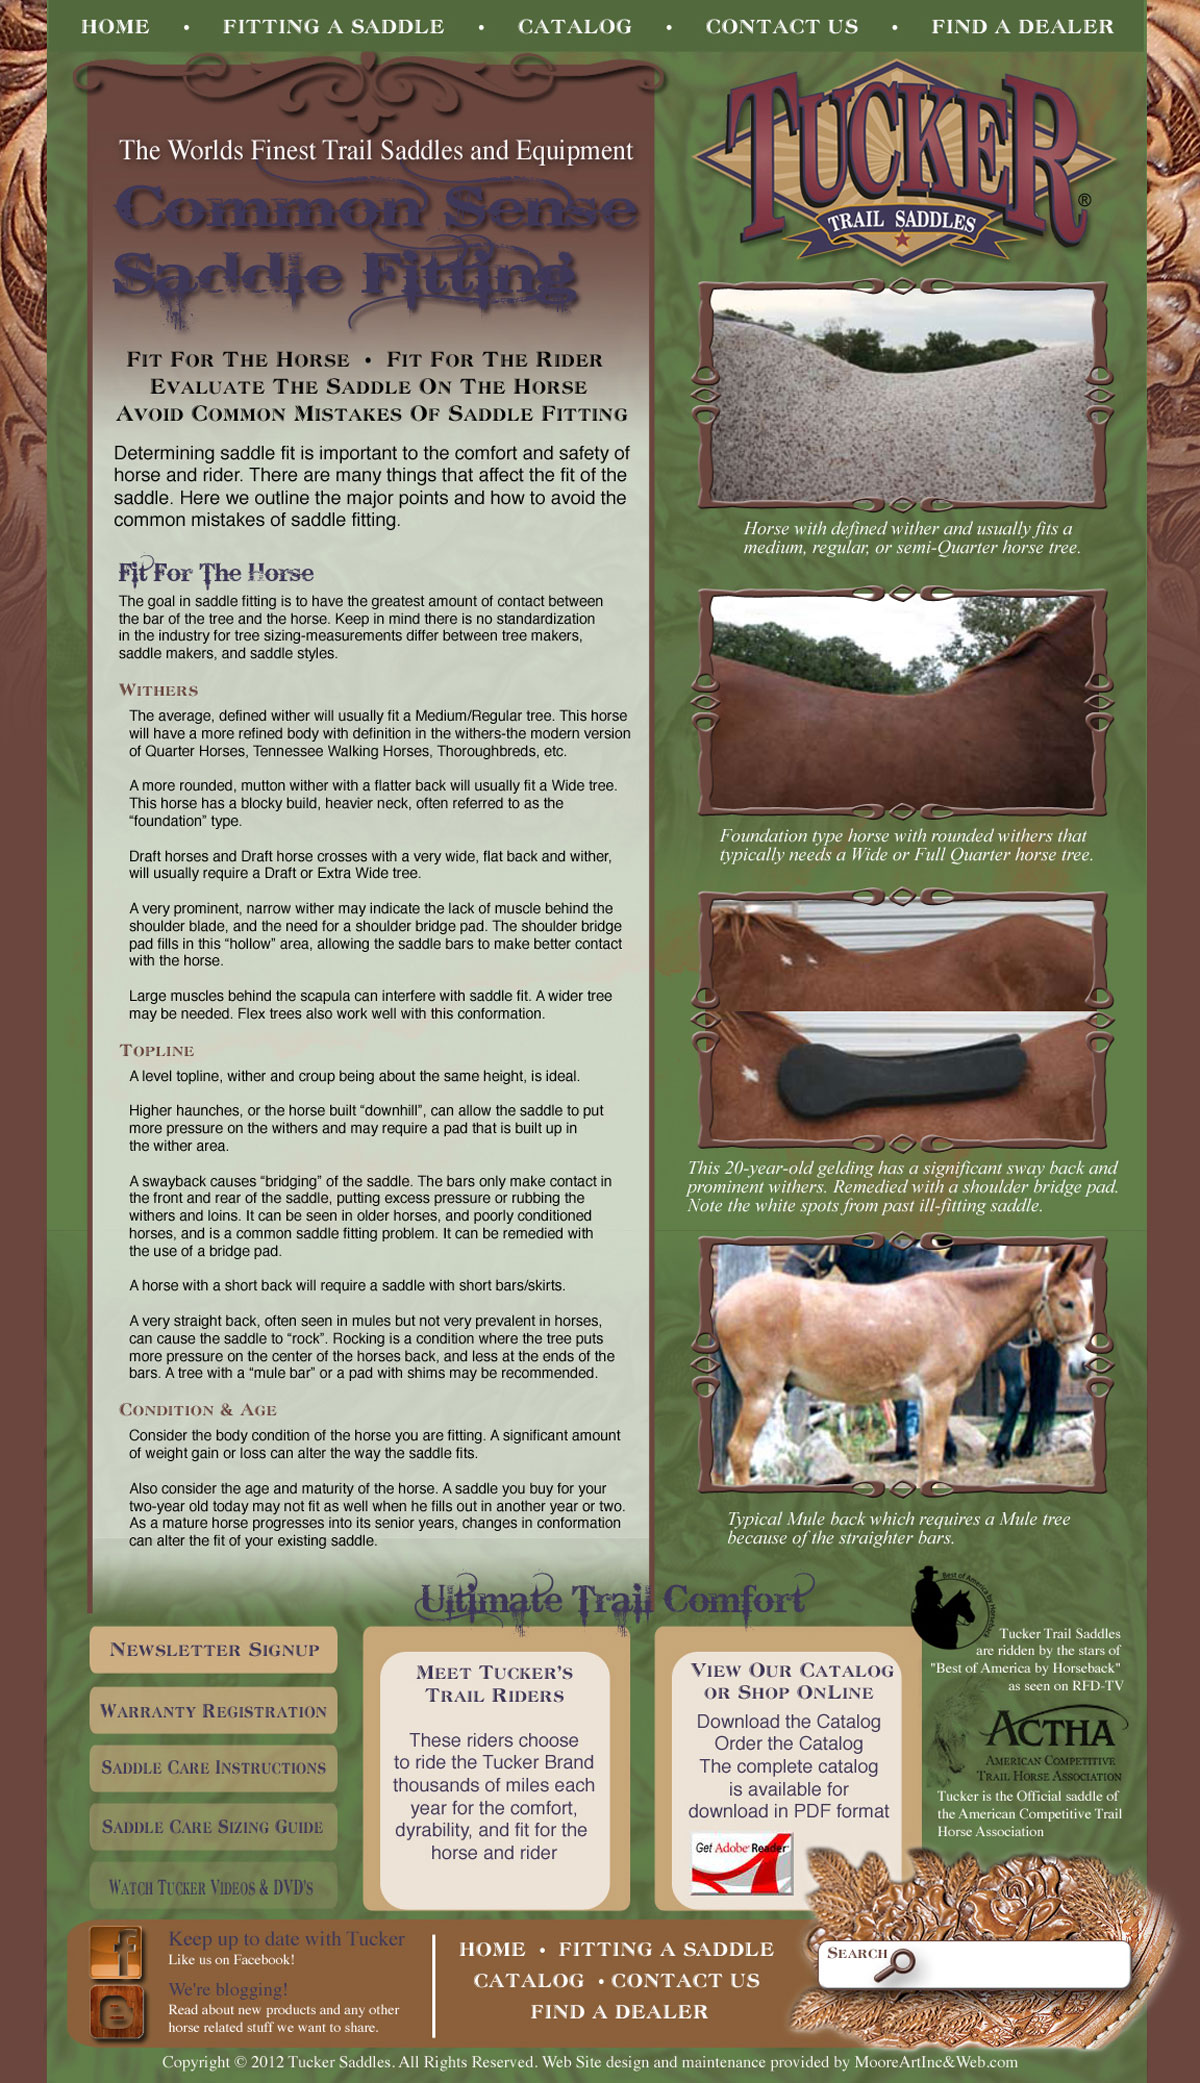 Page two of a web site designed for Tucker Saddle